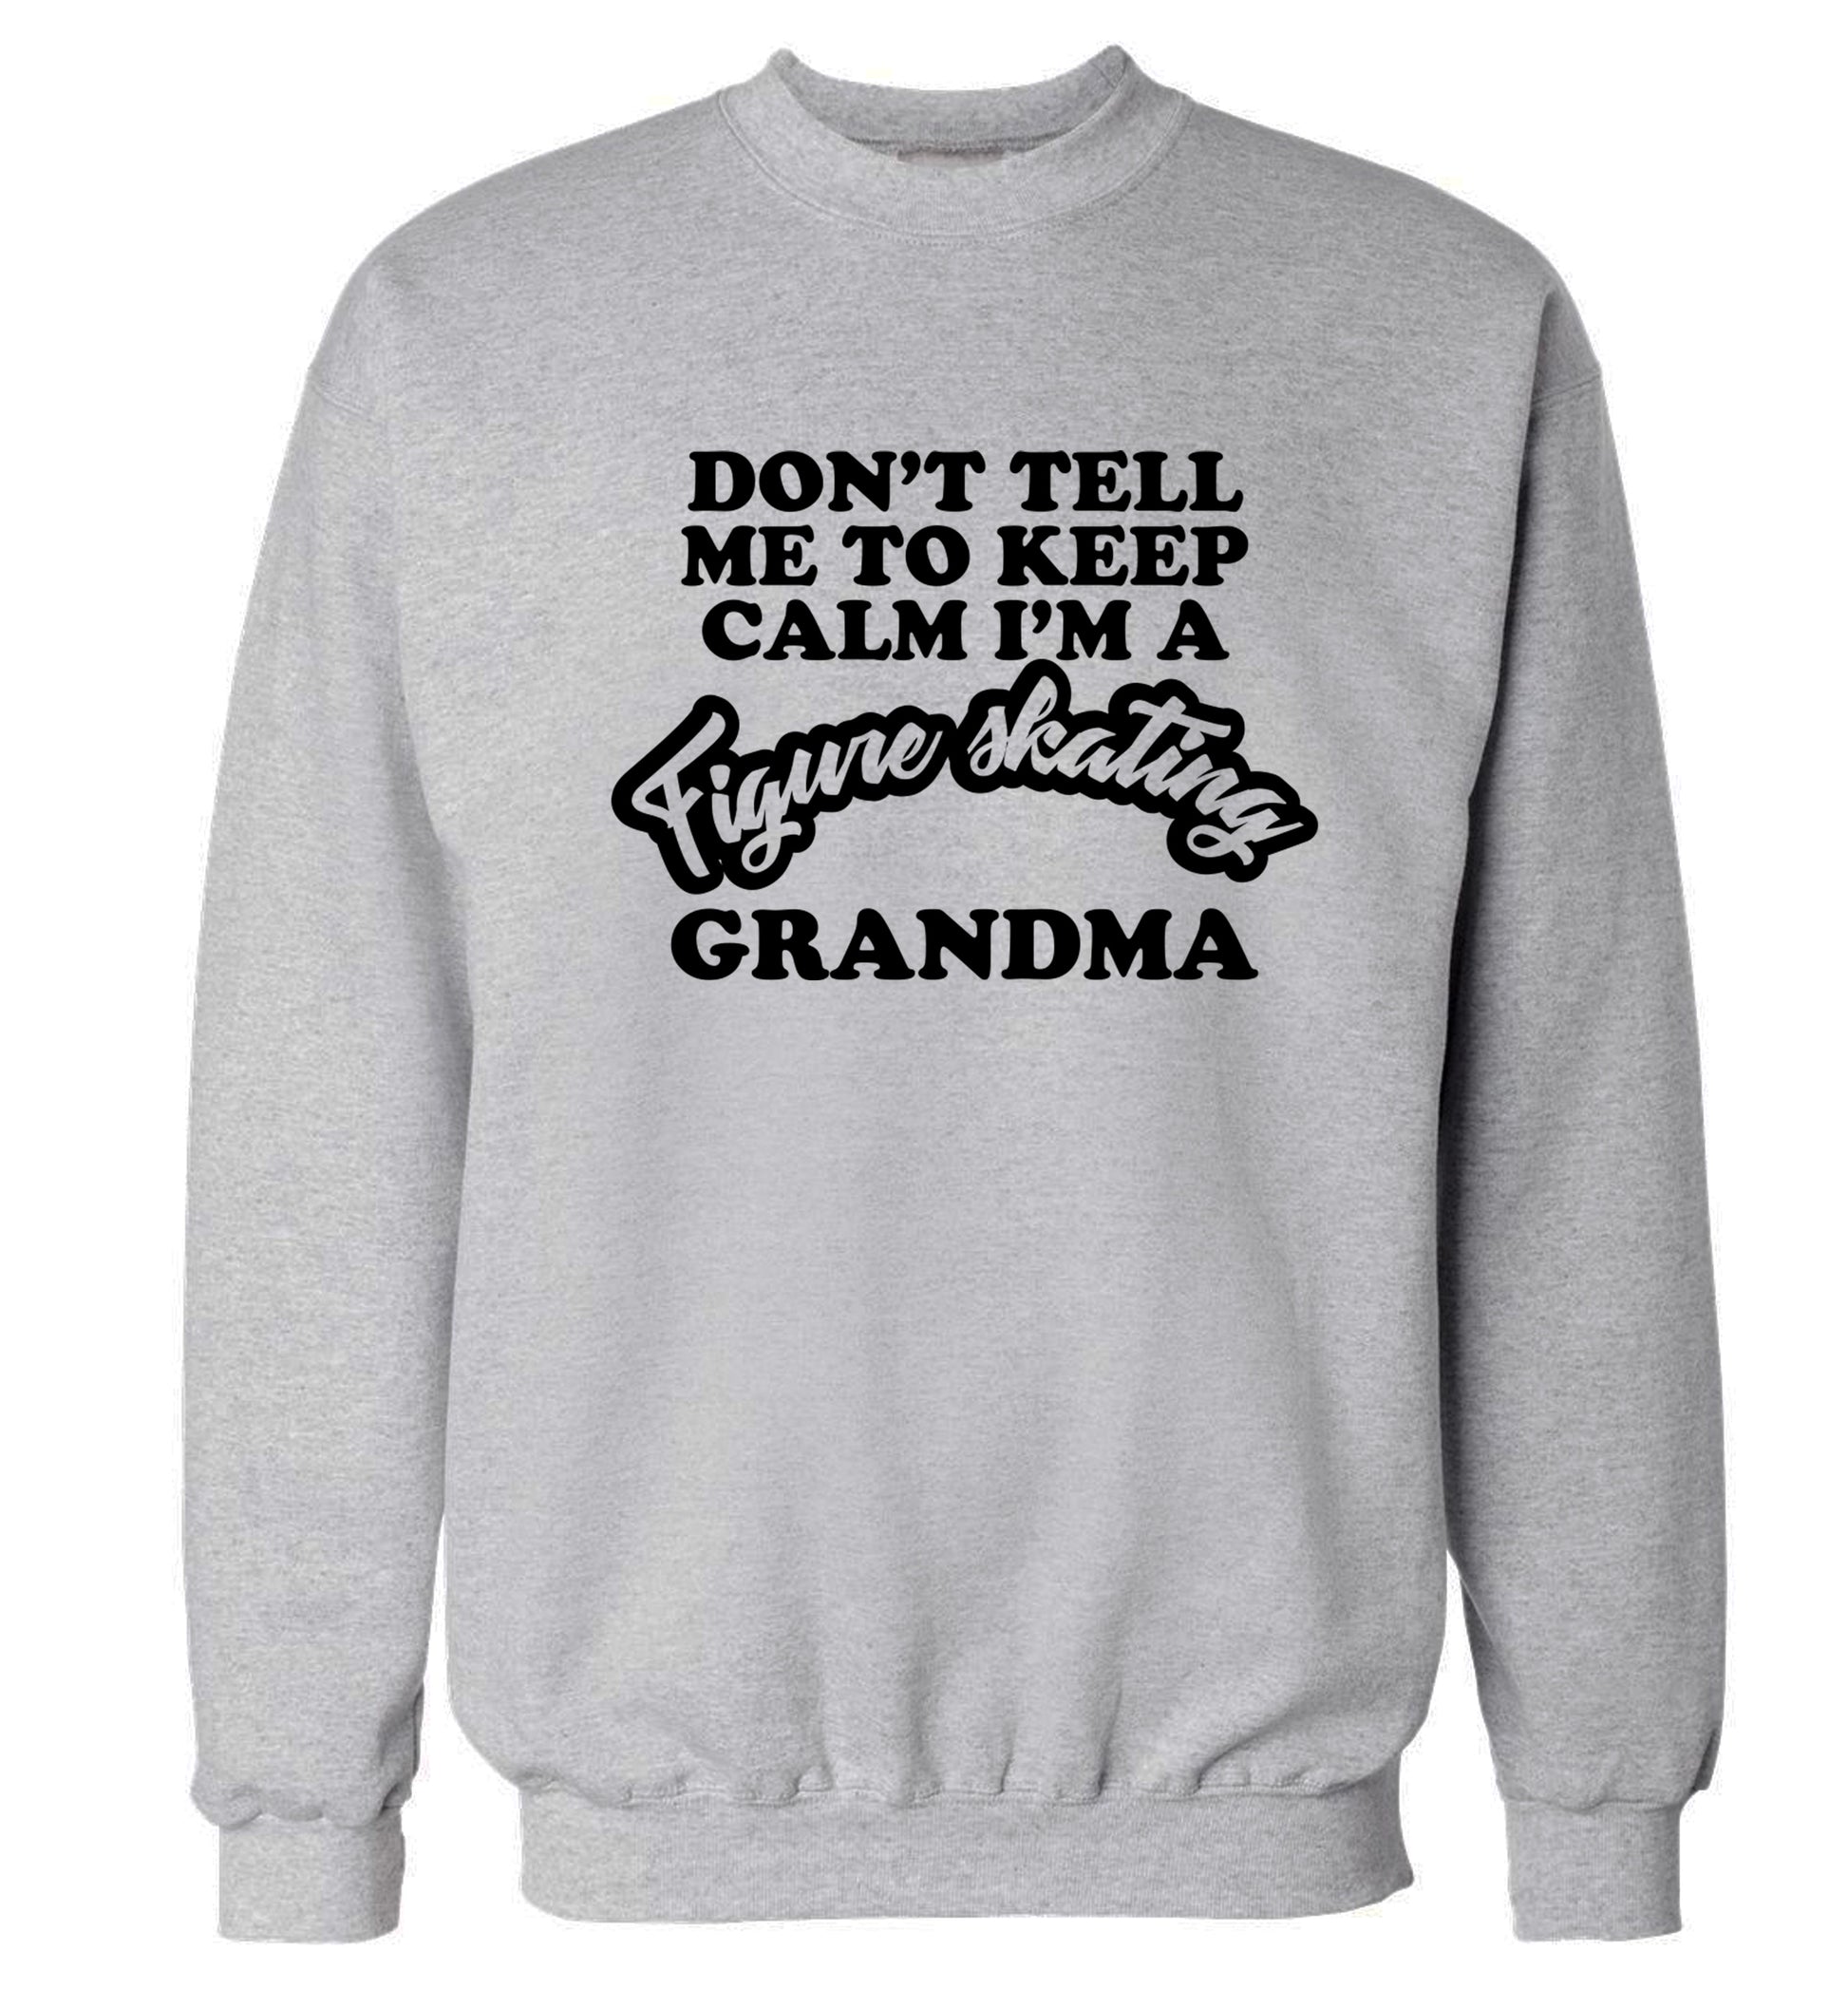 Don't tell me to keep calm I'm a figure skating grandma Adult's unisexgrey Sweater 2XL